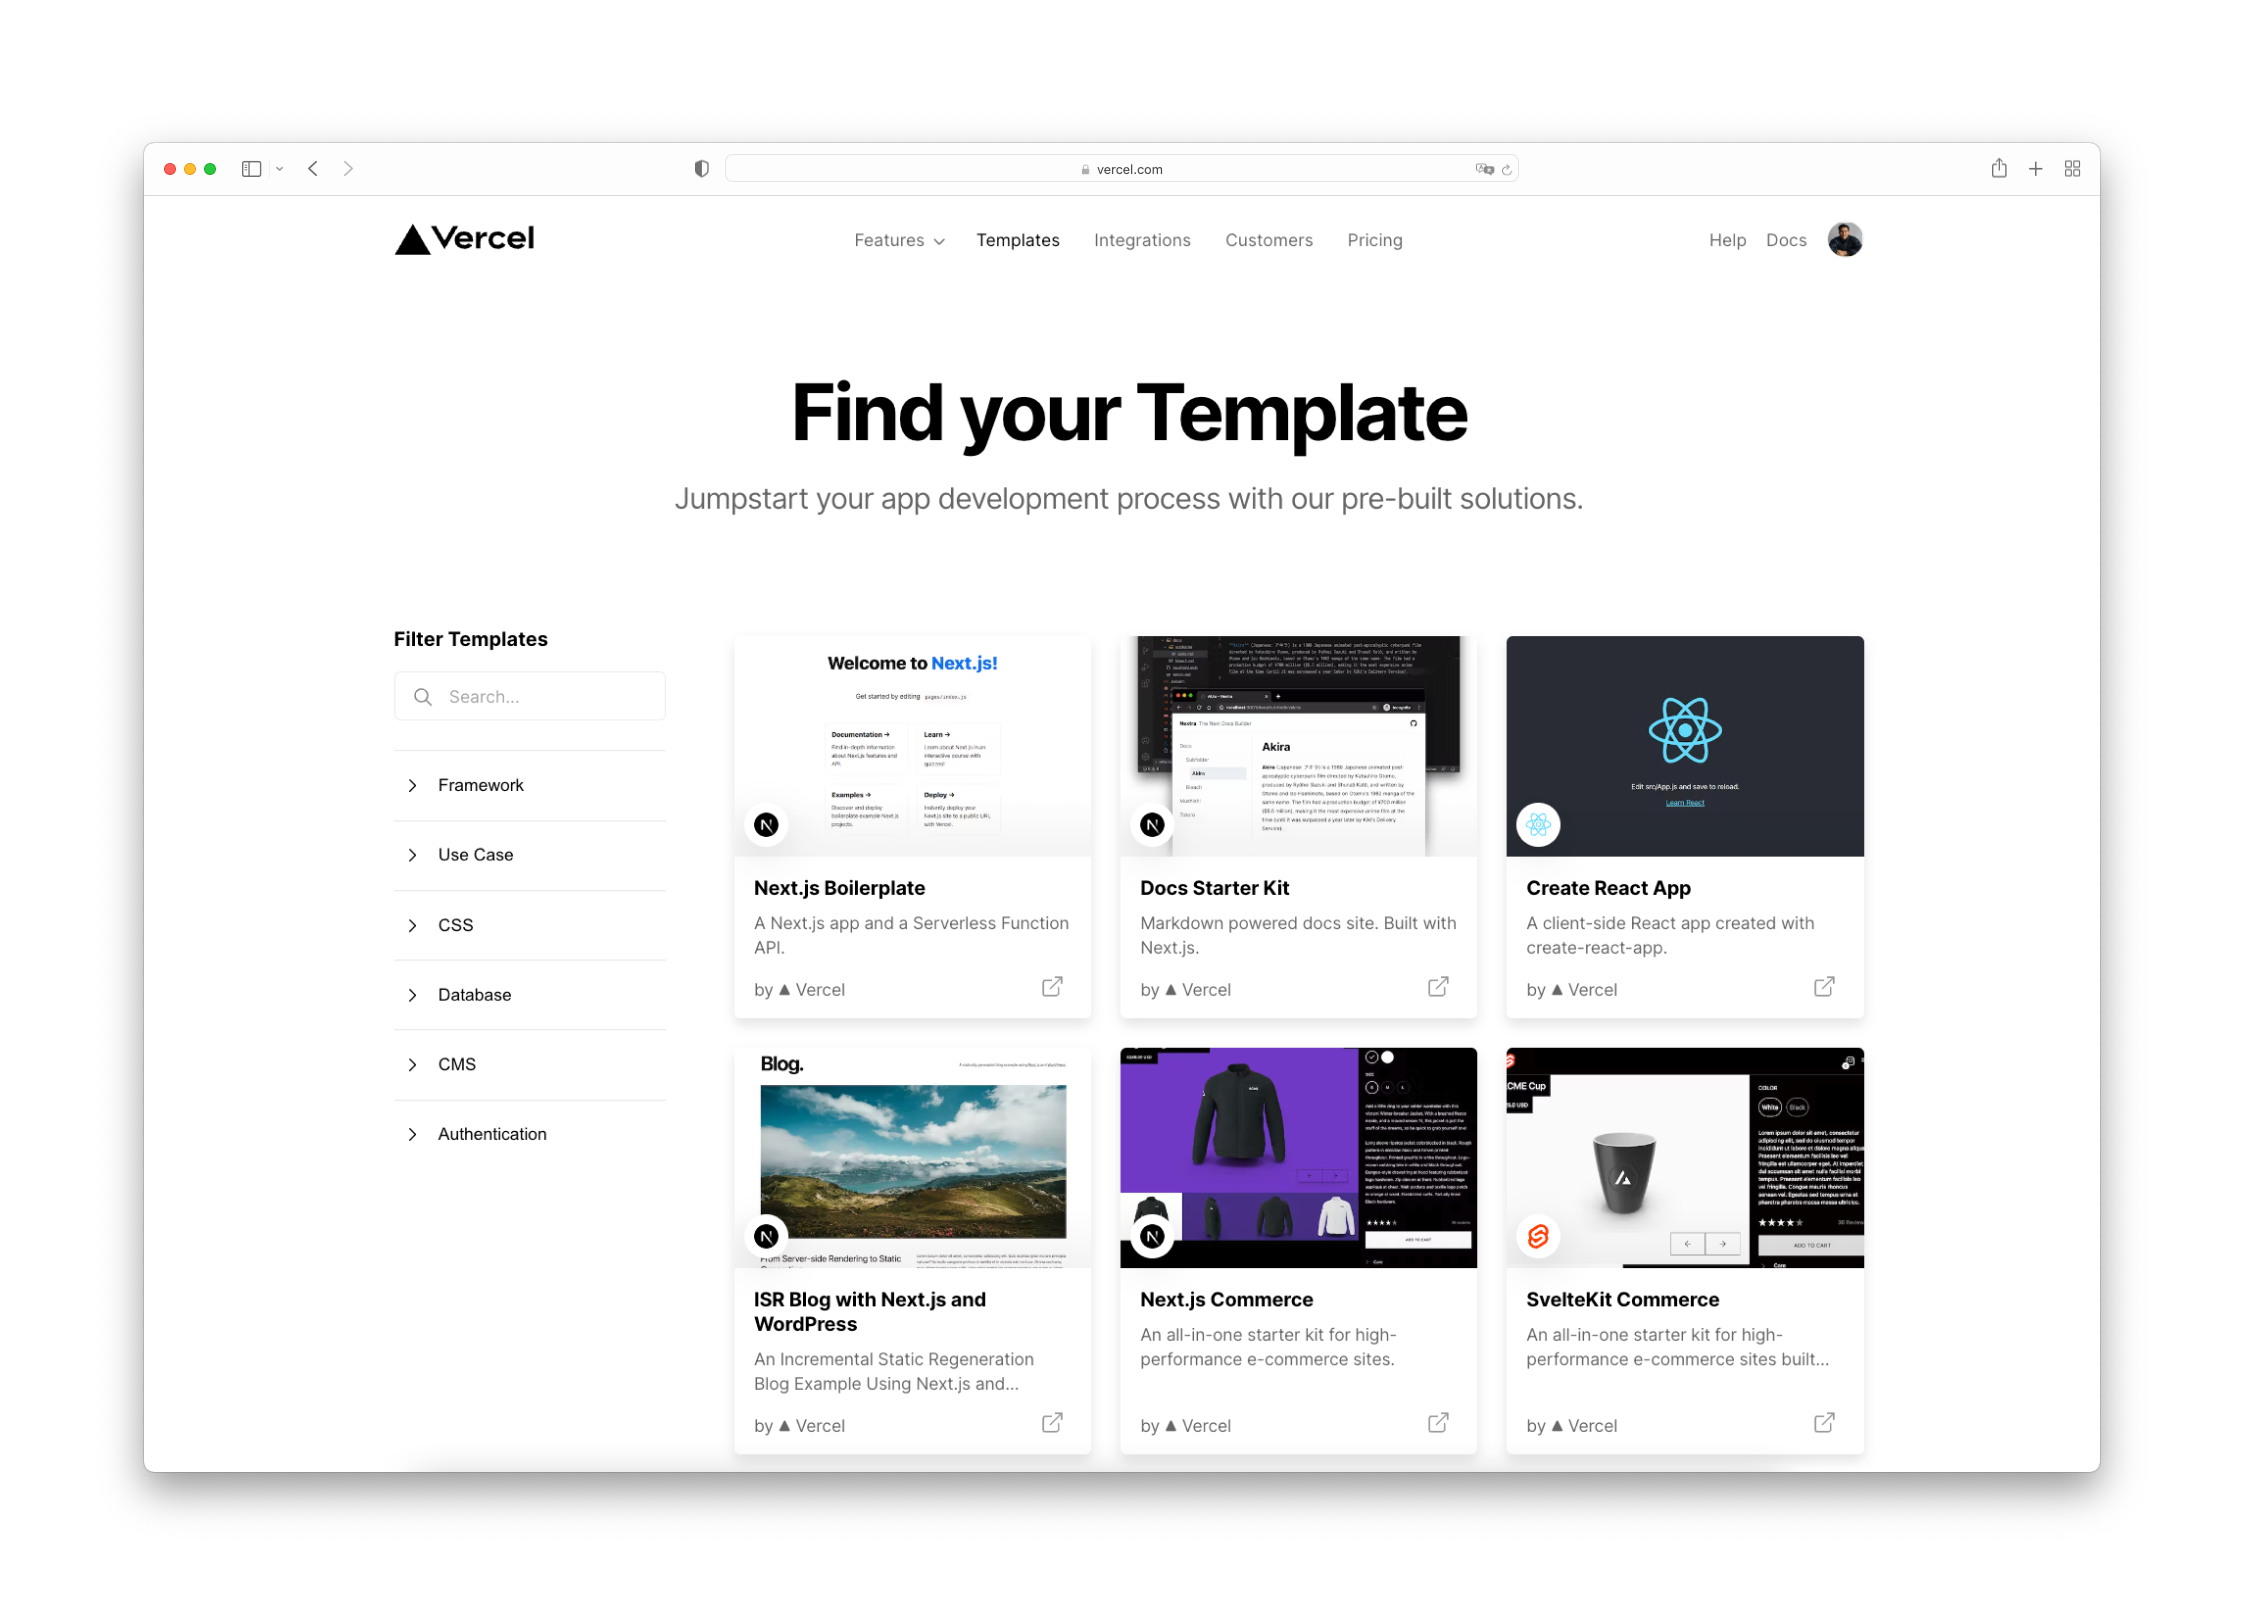 New version: wider selection of templates with fuzzy search & filters.